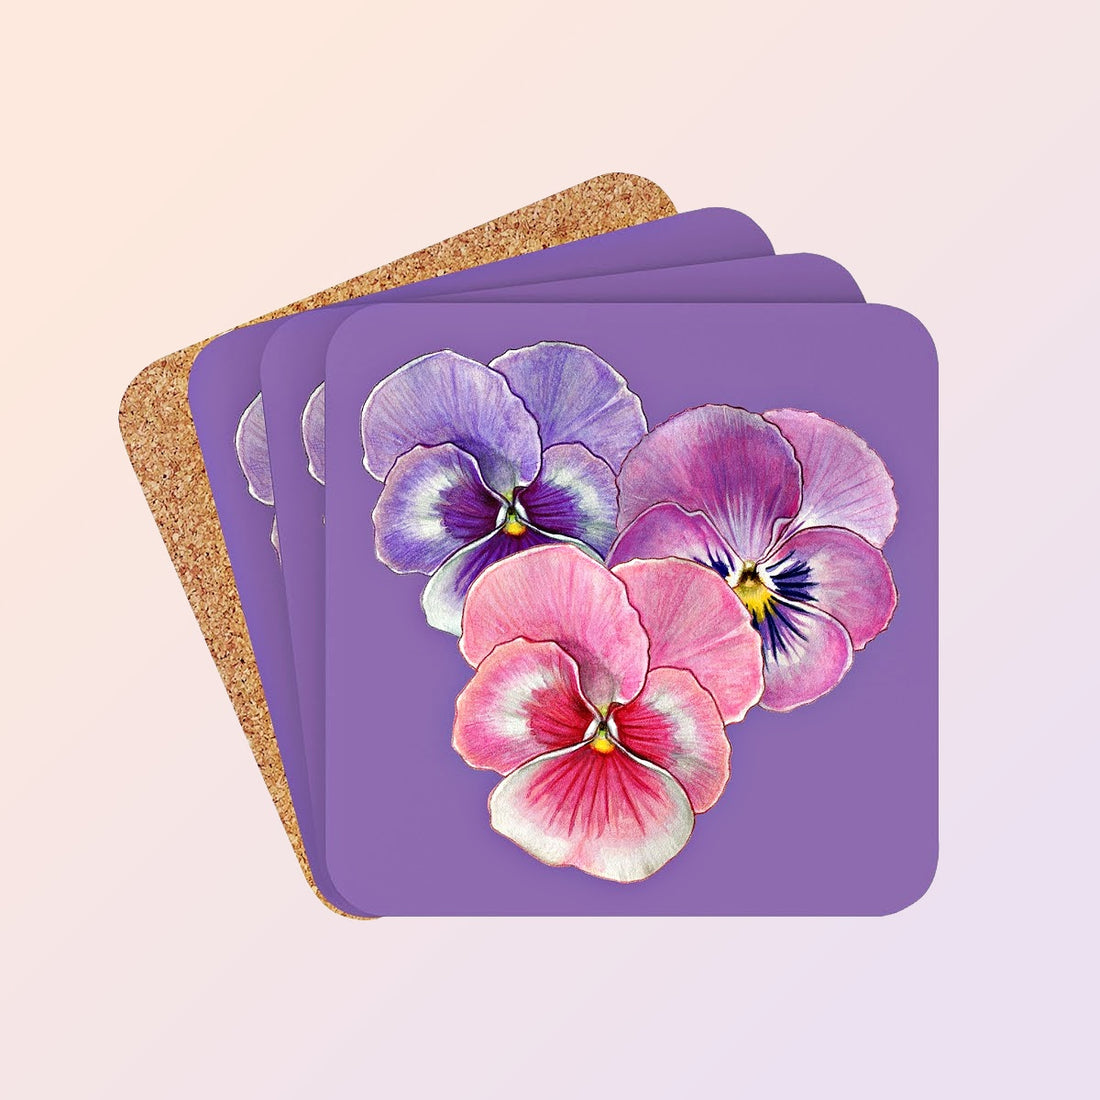 Just added to the store! It's a Pansy Coaster Set